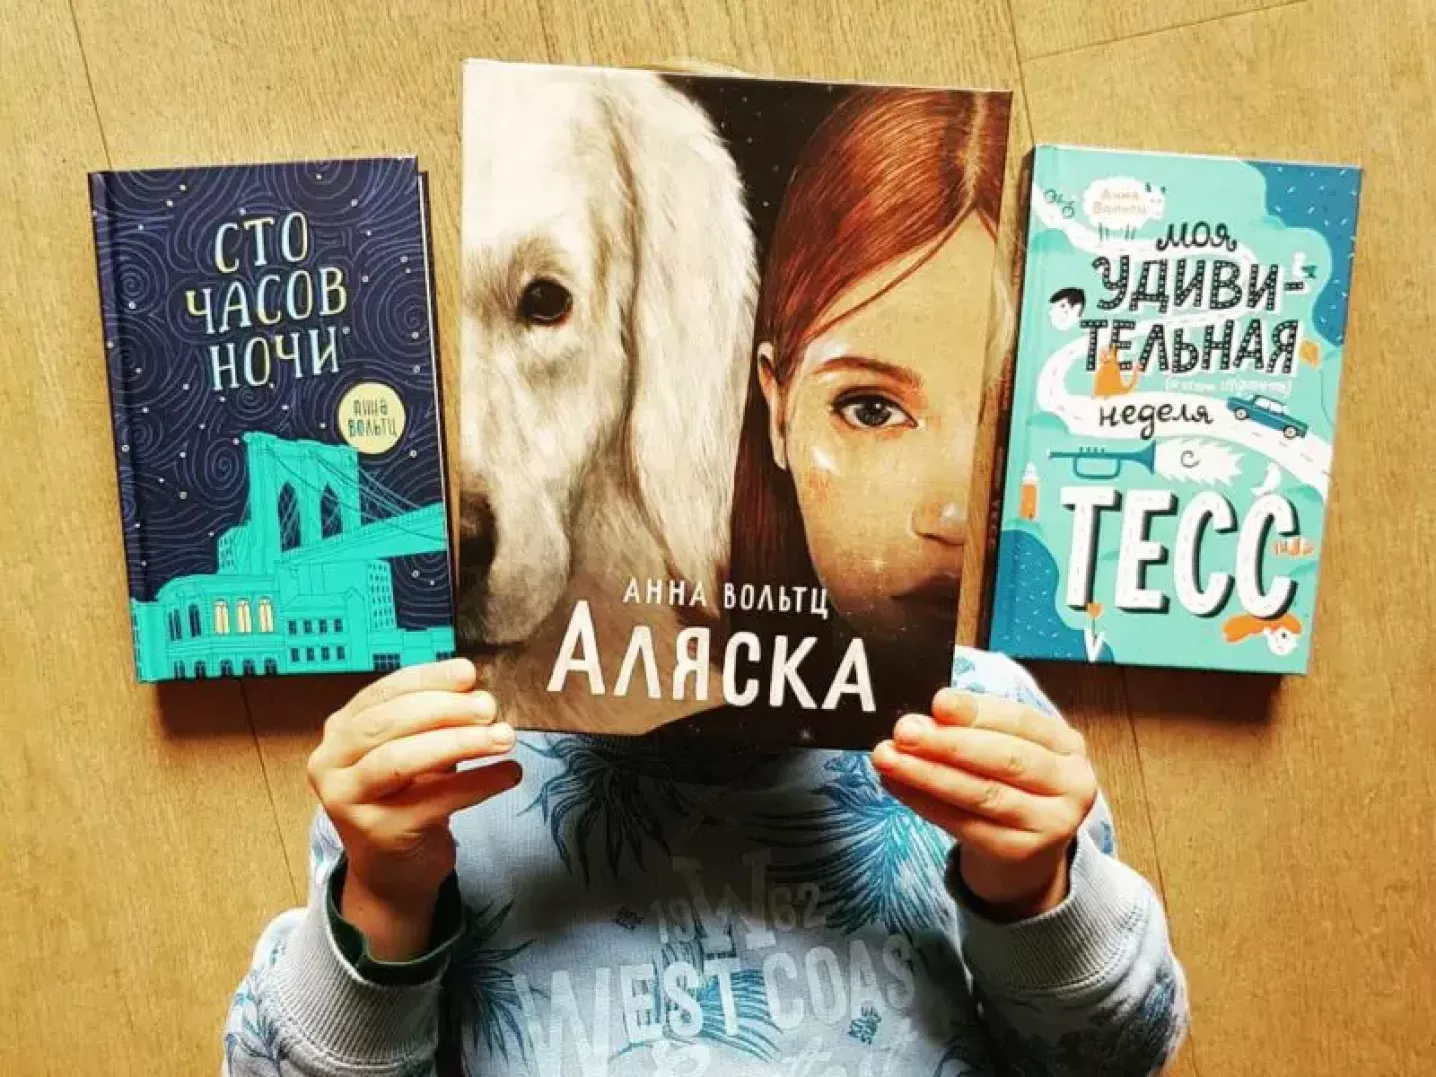 Anna Woltz, book covers in Russian